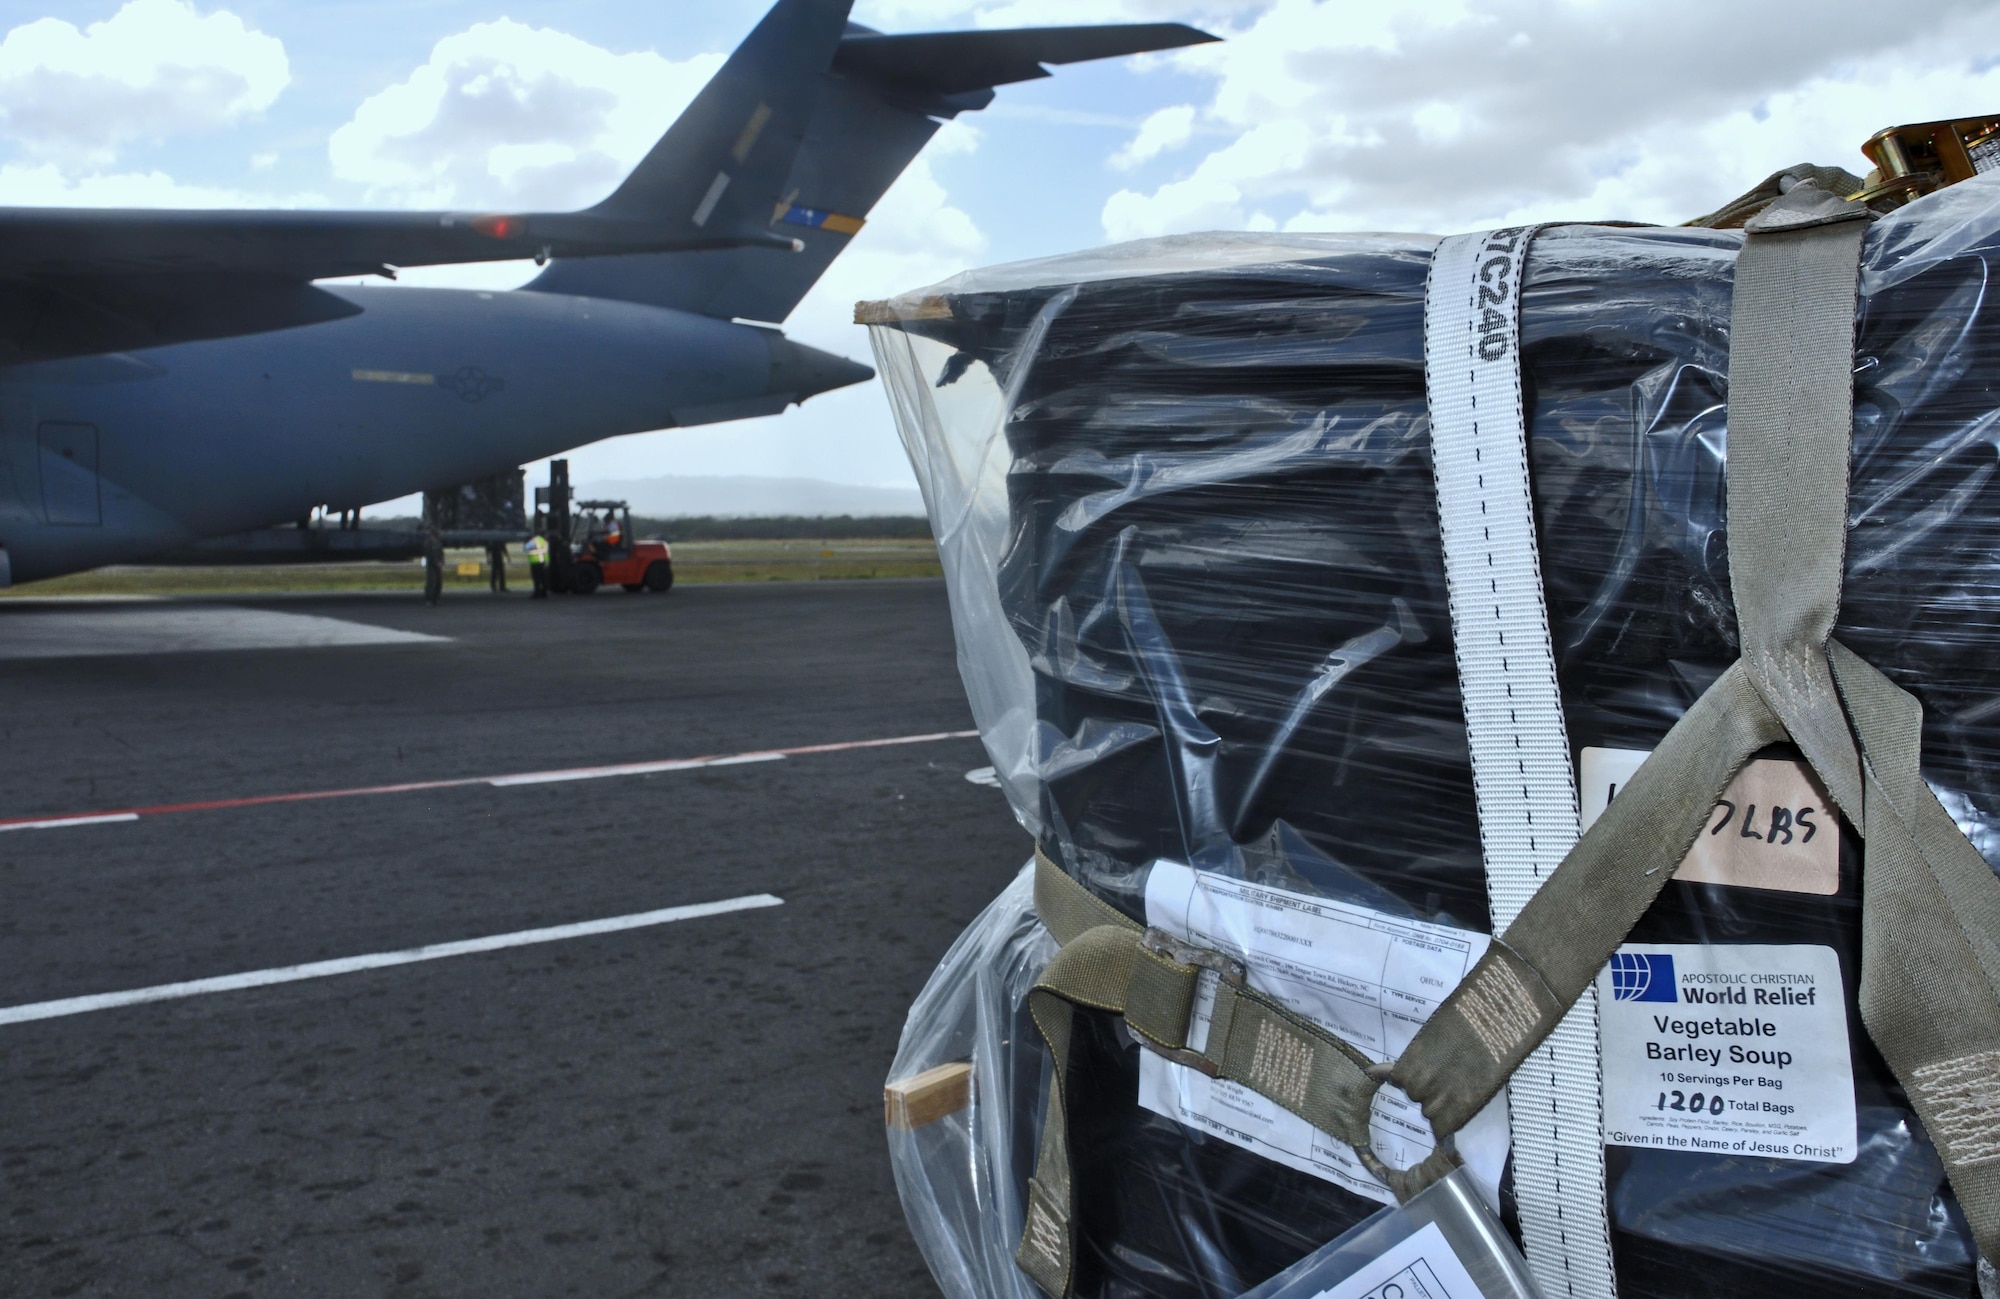 Citizen Airmen of the 315th Airlift Wing delivered over 130,000 pounds of donated humanitarian aid to an outreach organization in Managua, Nicaragua, during a training mission, February 5, 2017.  During the weekend mission, aircrews of two C-17s airlifted over 110,000 pounds of food – enough to provide an estimated 5.4 million meals - as part of the Denton program, which allows for space available on military cargo planes to be used for humanitarian aid. (U.S. Air Force photo by Maj. Wayne Capps)